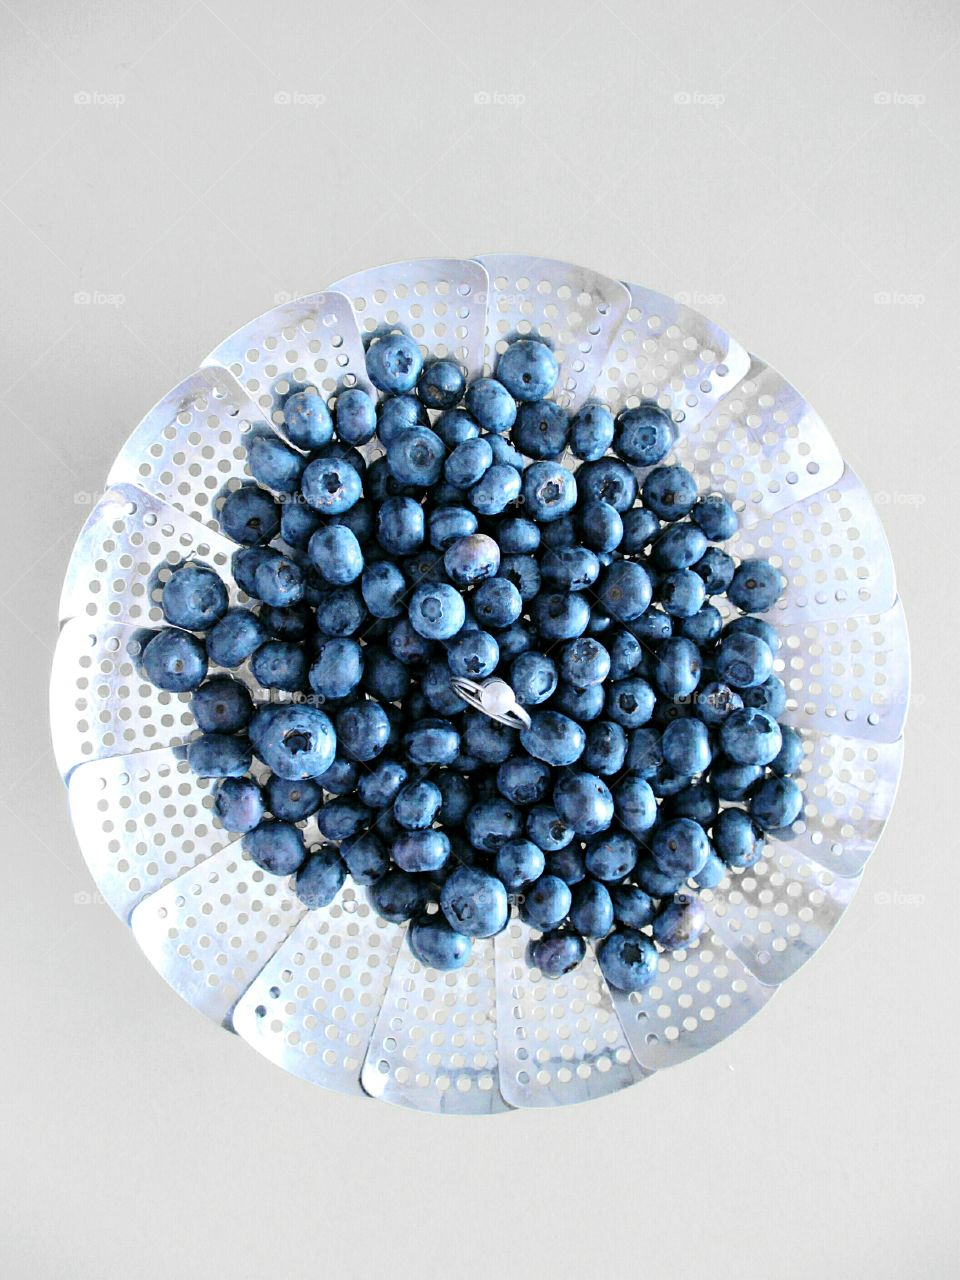 Blueberry on plate